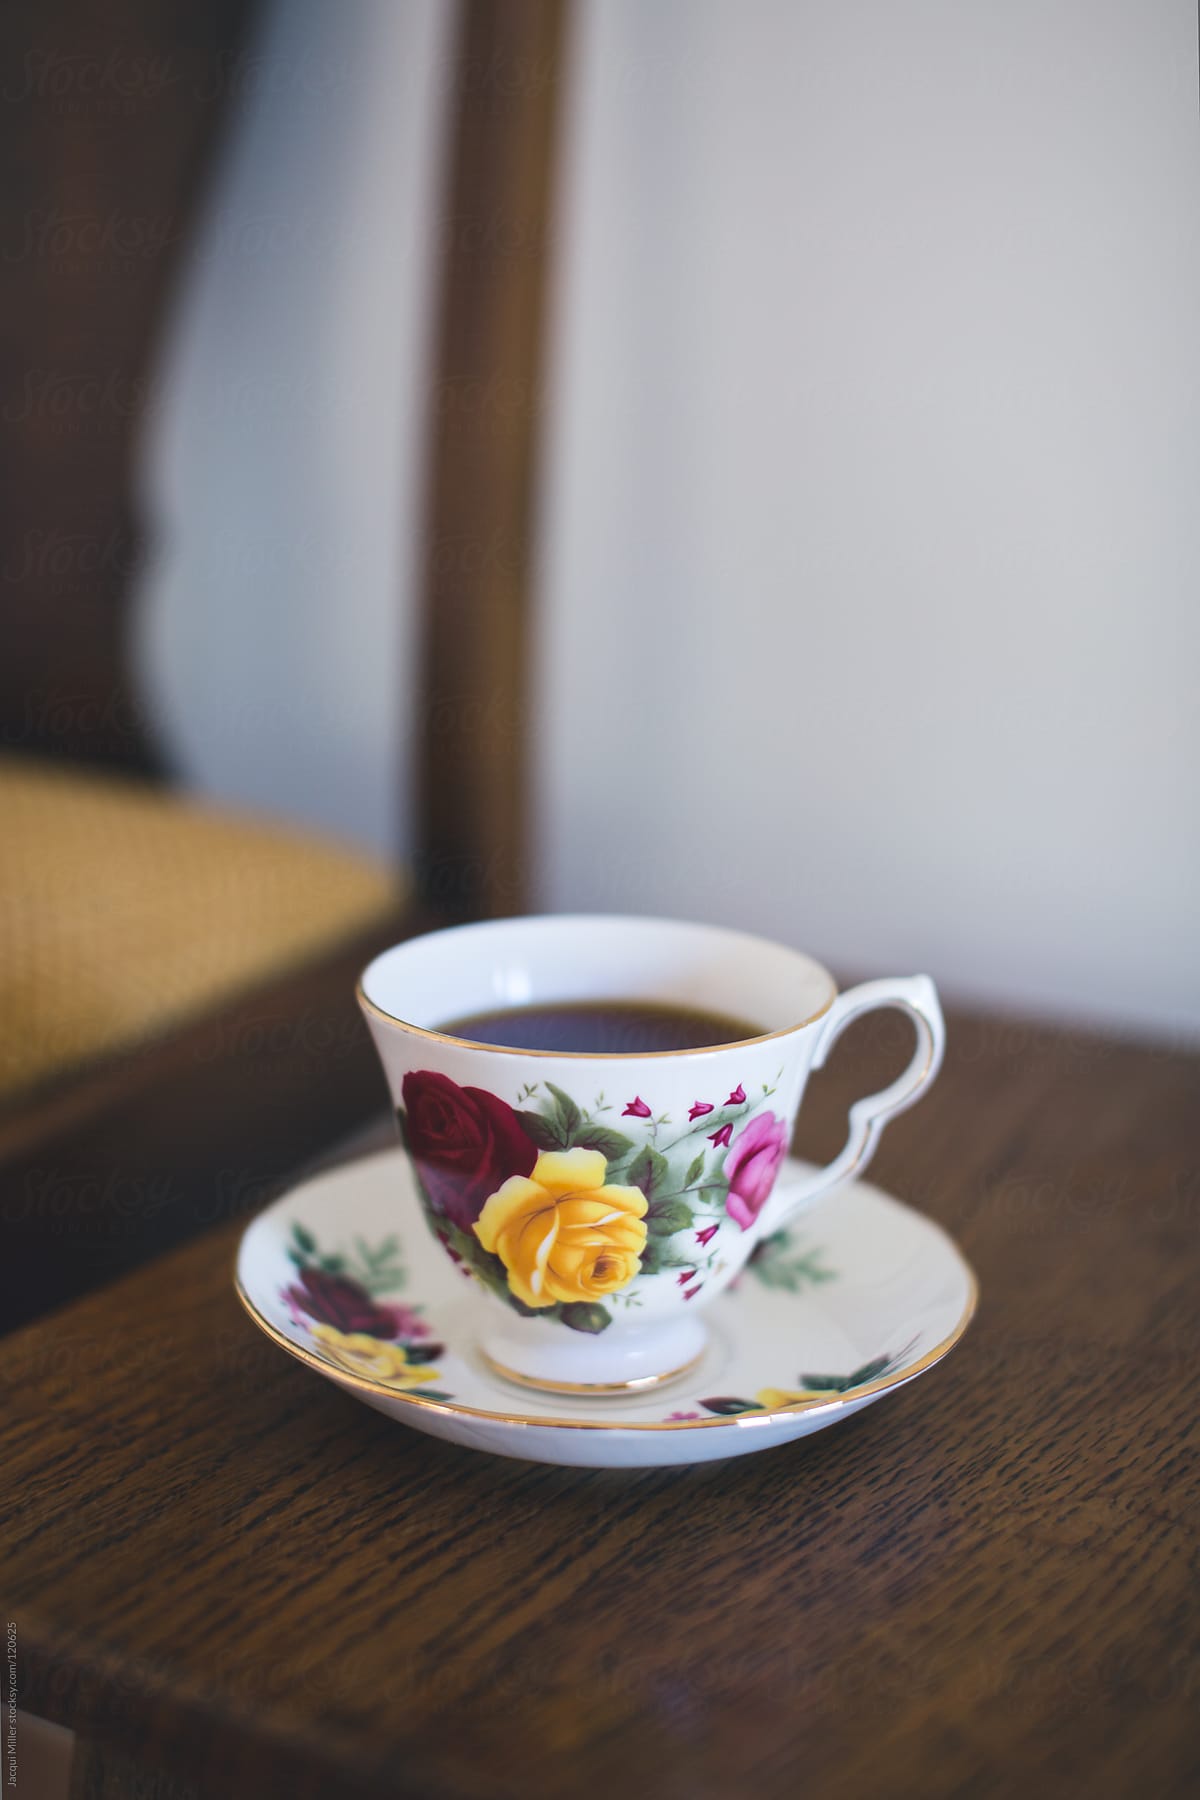 China teacup on an antique table